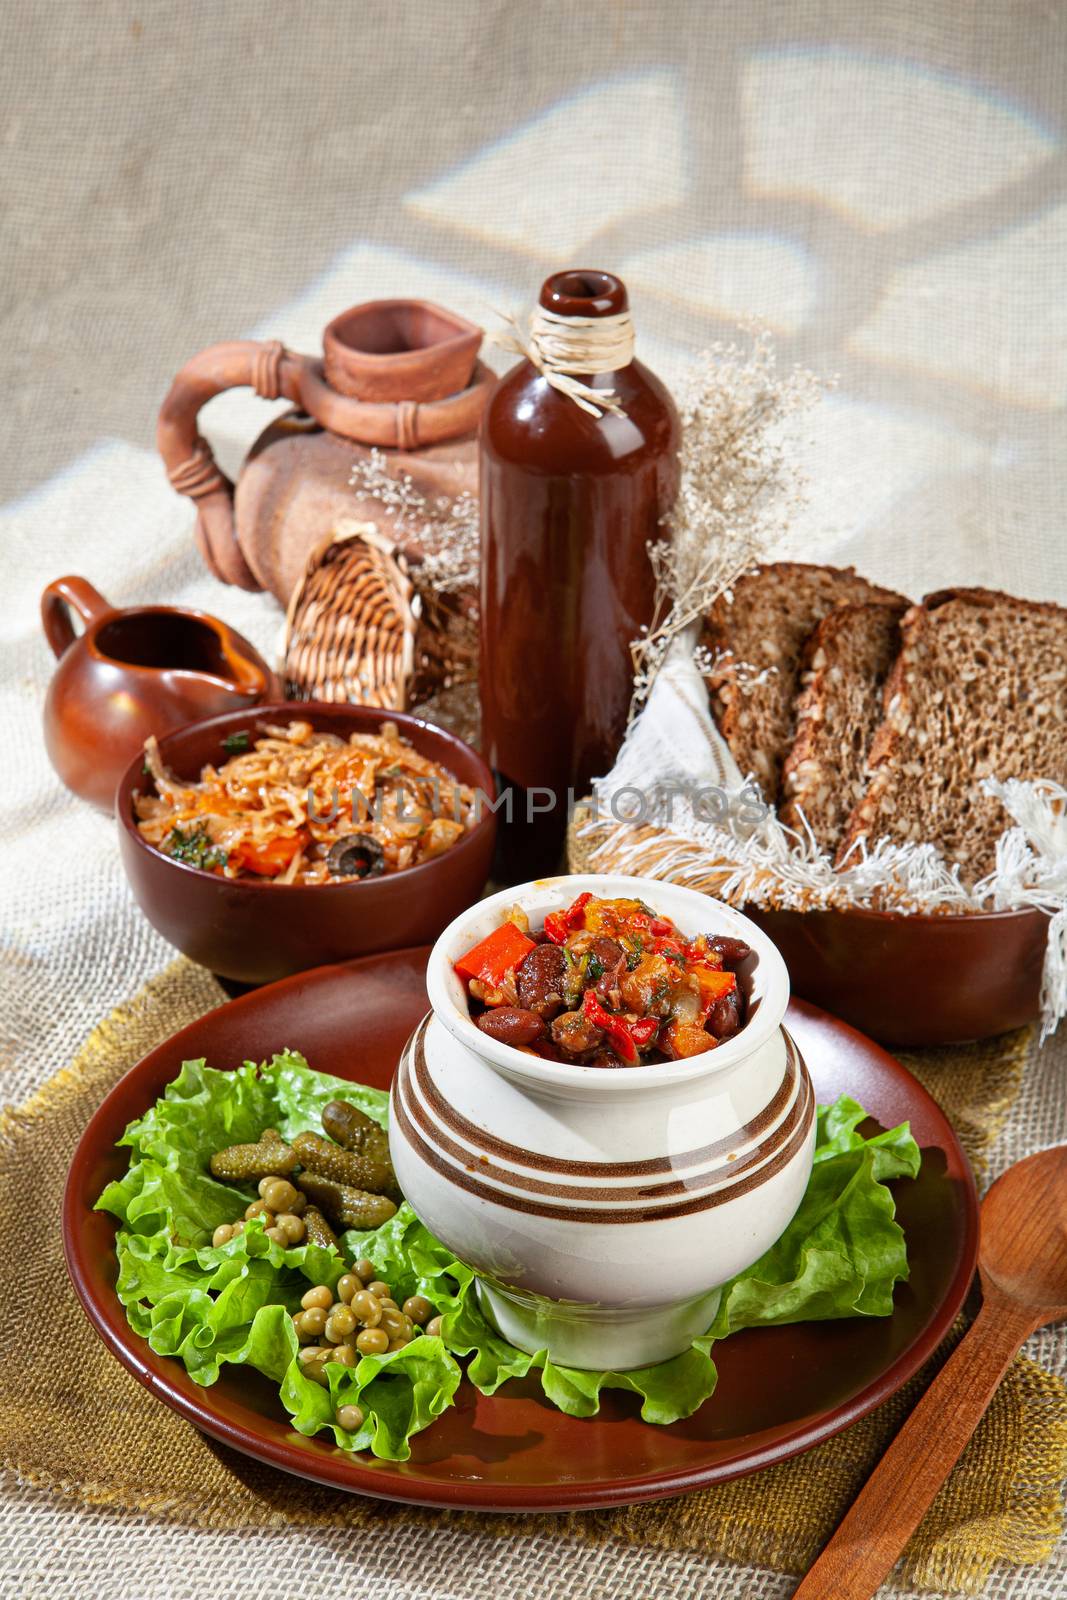 Bread, greenery and ceramic vases on a canvas background